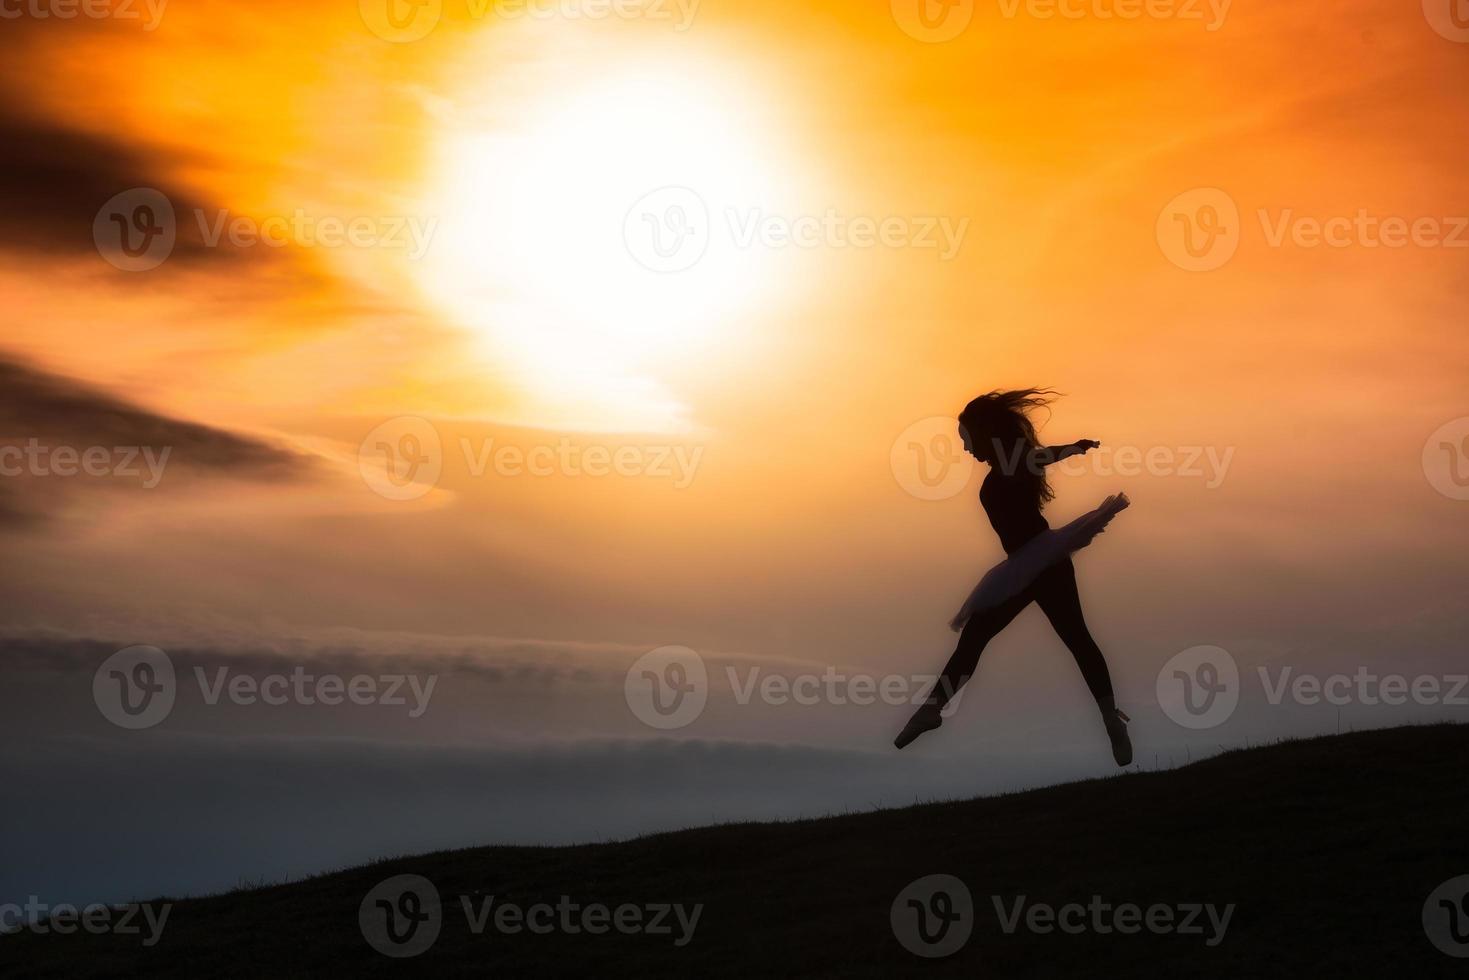 Ballerina silhouette, dancing alone in nature in the mountains at sunset photo